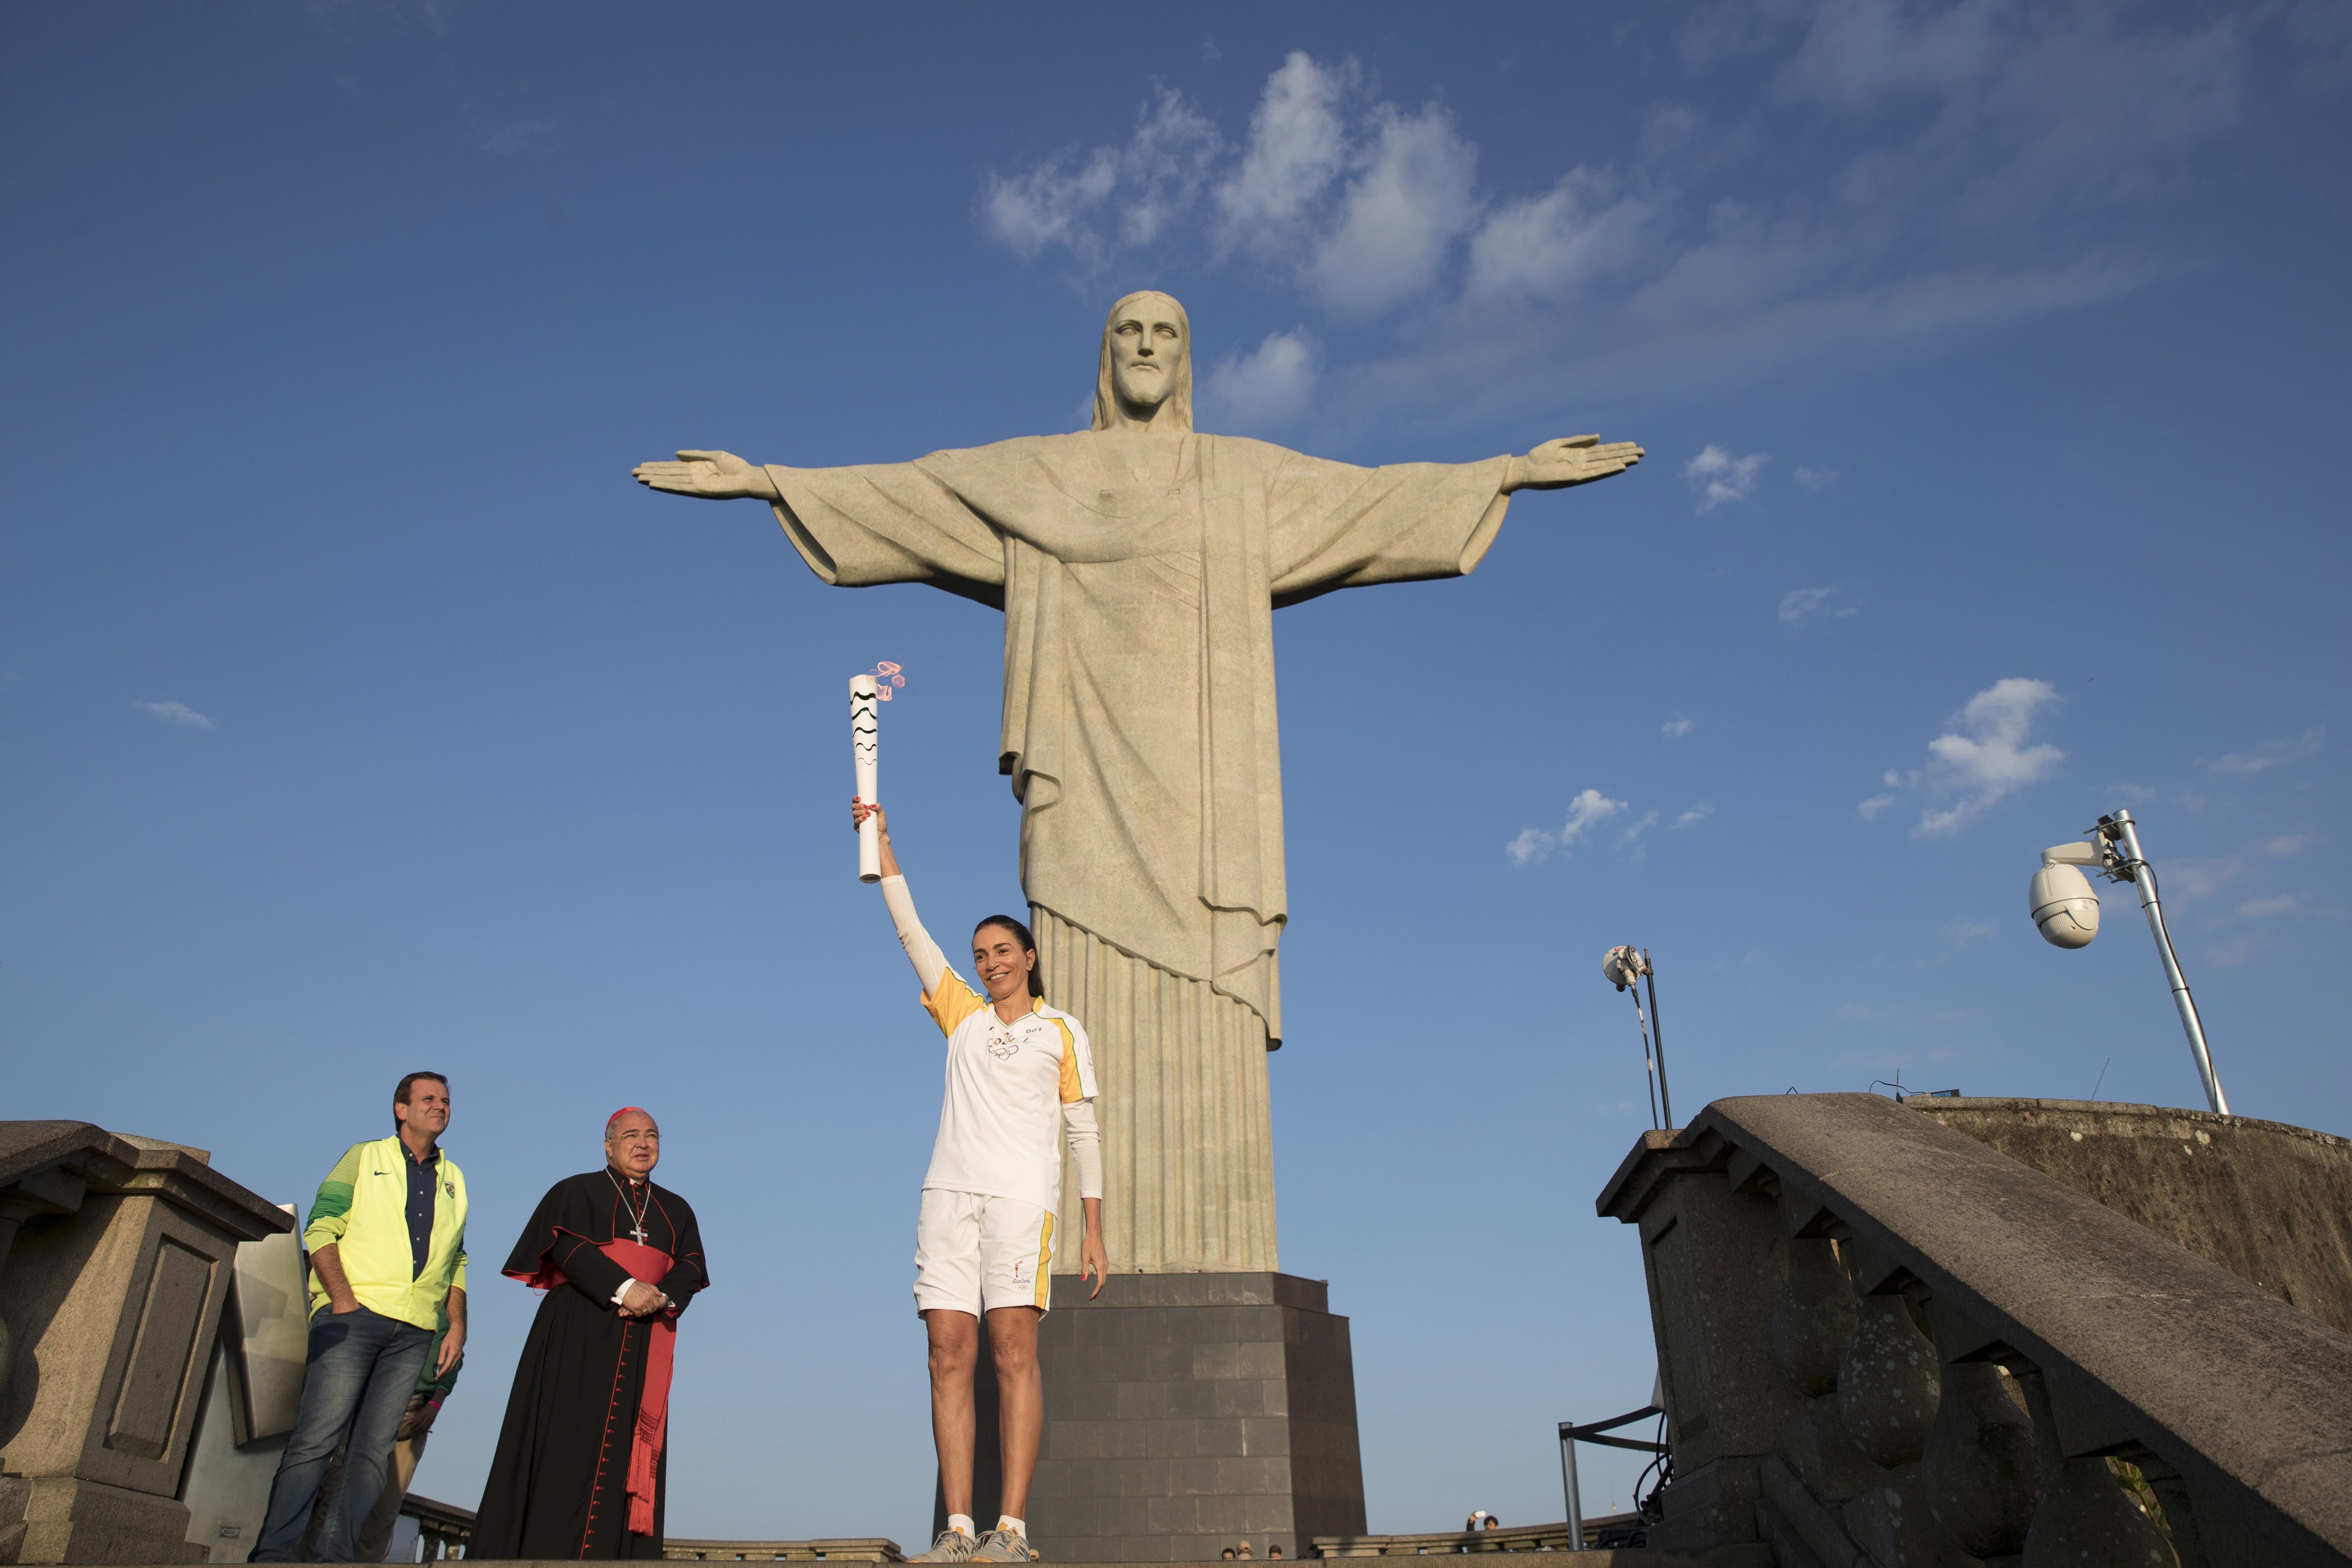 Brazil's Isabel Barroso Salgado carries the Olympic torch in front of the Christ the Redeemer statue on its way for the opening ceremony of Rio's 2016 Summer Olympics in Rio de Janeiro, Brazil, Friday, Aug. 5, 2016.